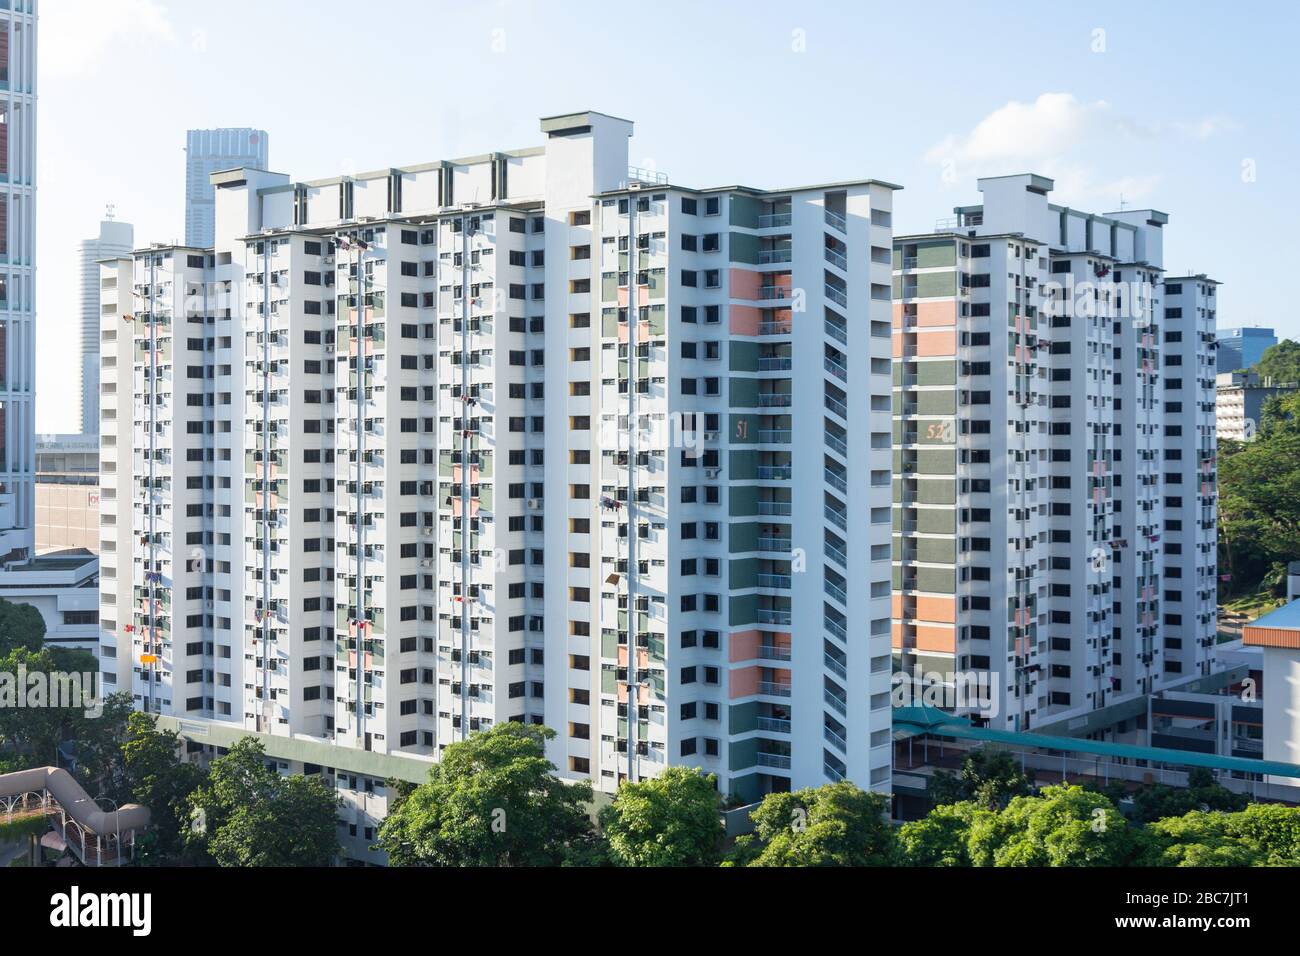 Large apartment blocks, Havelock Road, Chinatown,  Outram District, Central Area, Singapore Stock Photo